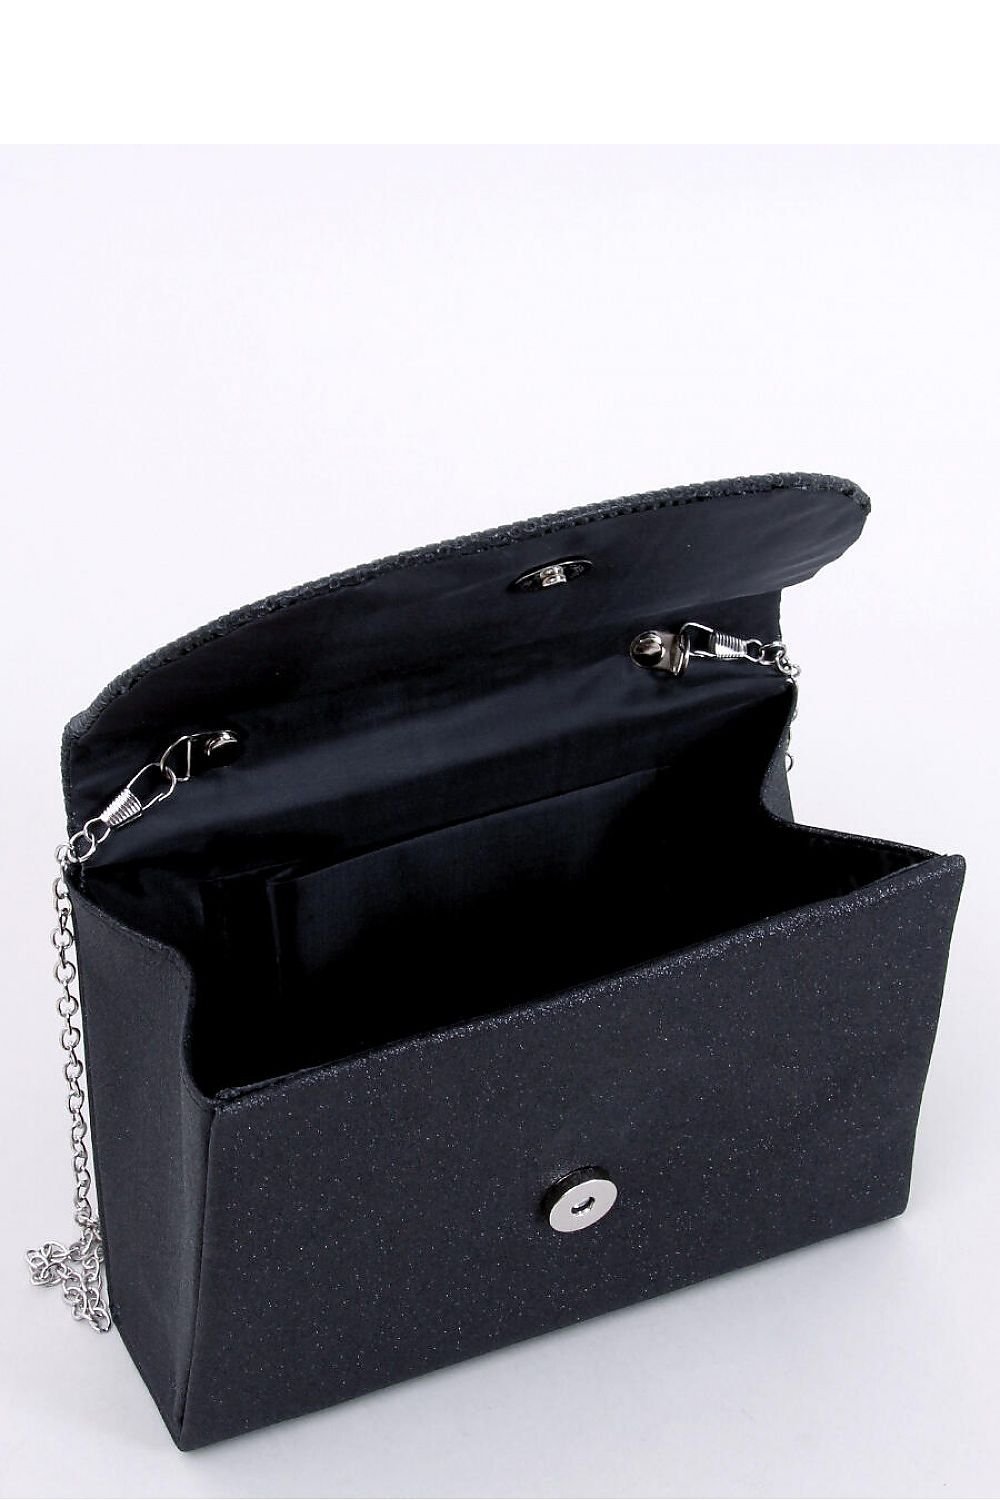 Envelope clutch bag - M&H FashionEnvelope clutch bagM&H FashionM&H Fashion189608_1103866one-size-fits-allEnvelope clutch bag InelloM&H FashionM&H FashionVisiting handbag - a clutch bag for women. It can be worn in two ways ? classically in hand or on a delicate chain. It is fastened with a magnetic clasp, and inside Envelope clutch bag